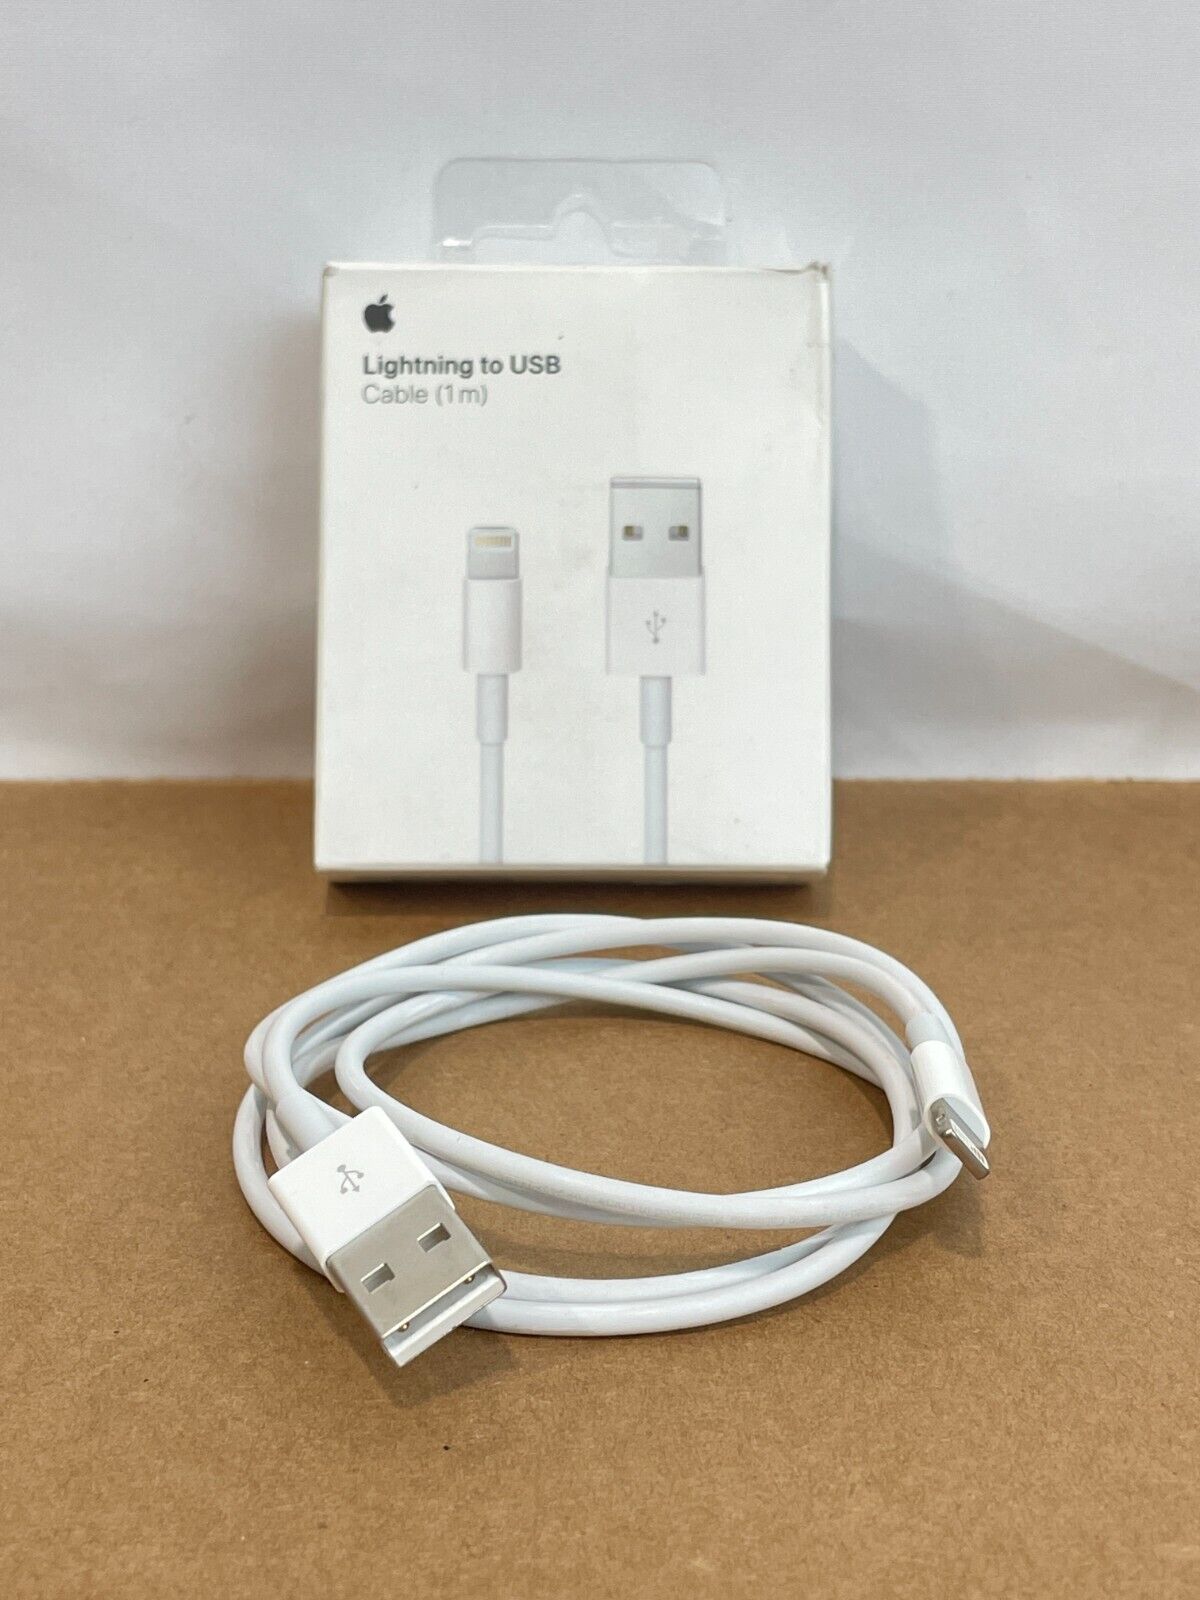 Bliv forvirret retfærdig Triumferende ♥ New, Open Box - Apple USB Type-A to Lightning Cable 1 Meter (3.3') M –  Small Dog Electronics